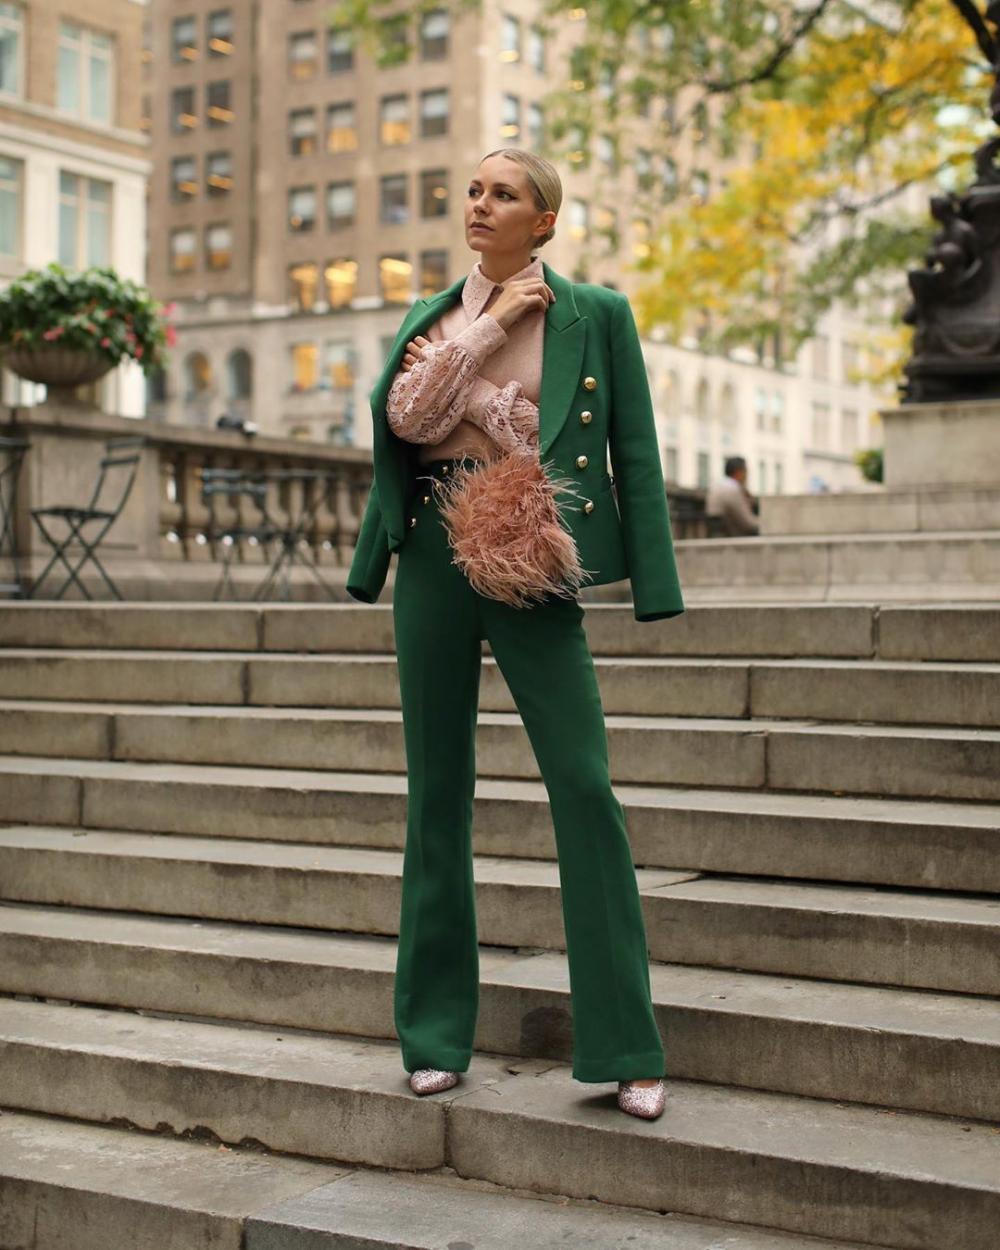 10 best stylish and elegant women's looks for fall